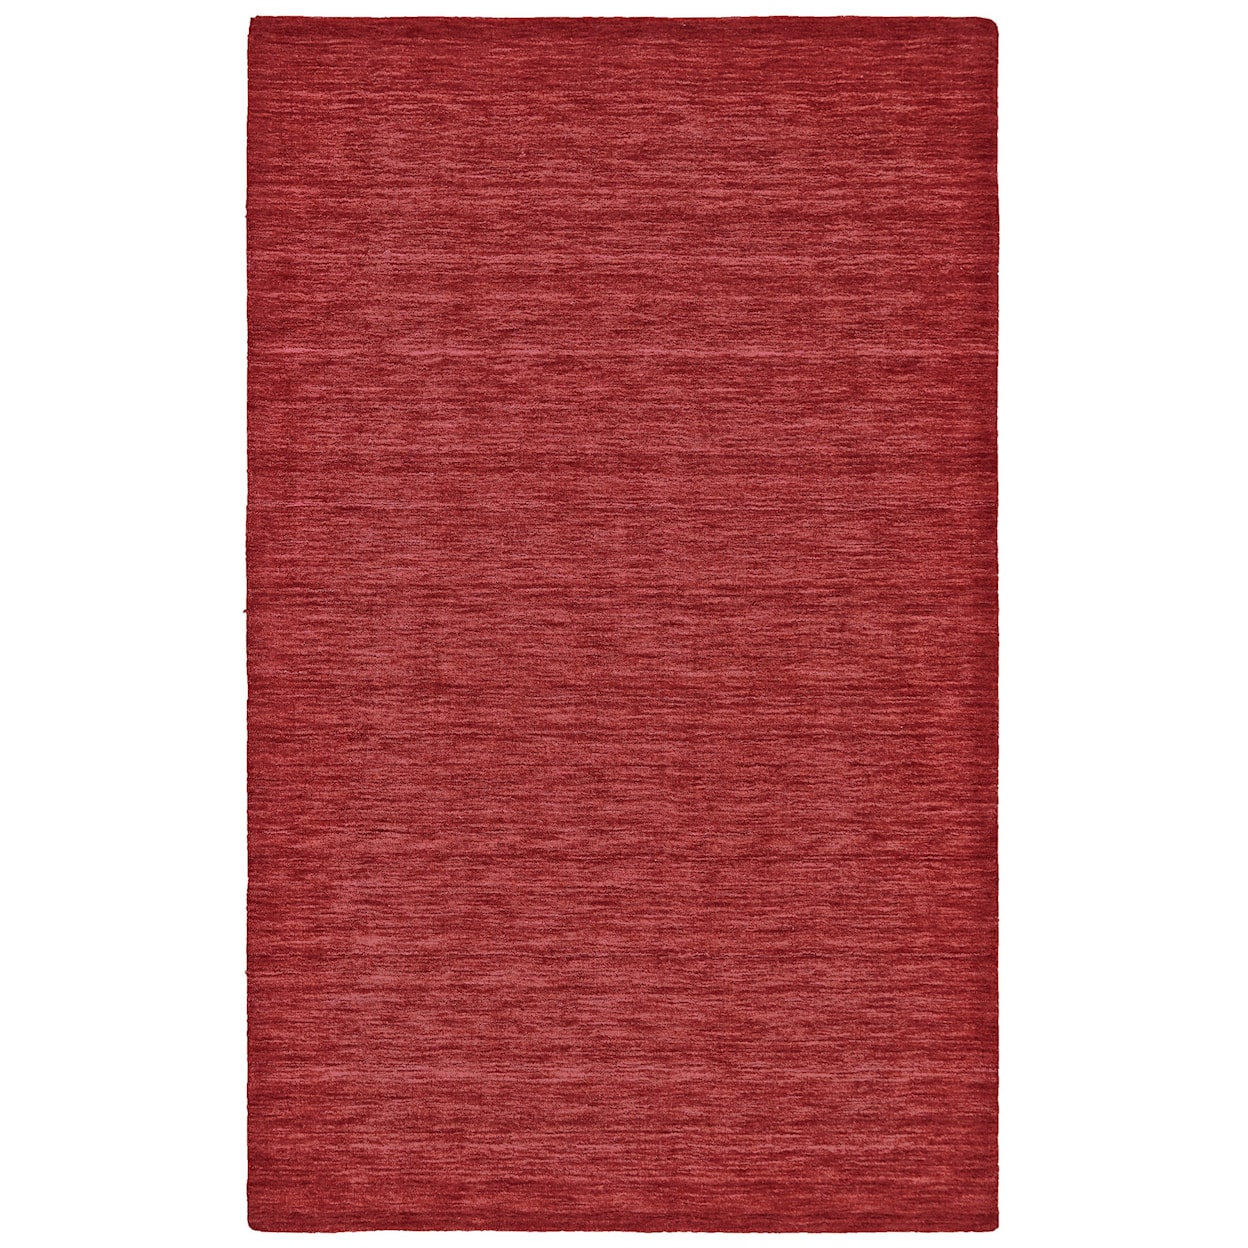 Feizy Rugs Luna Red 5' x 8' Area Rug